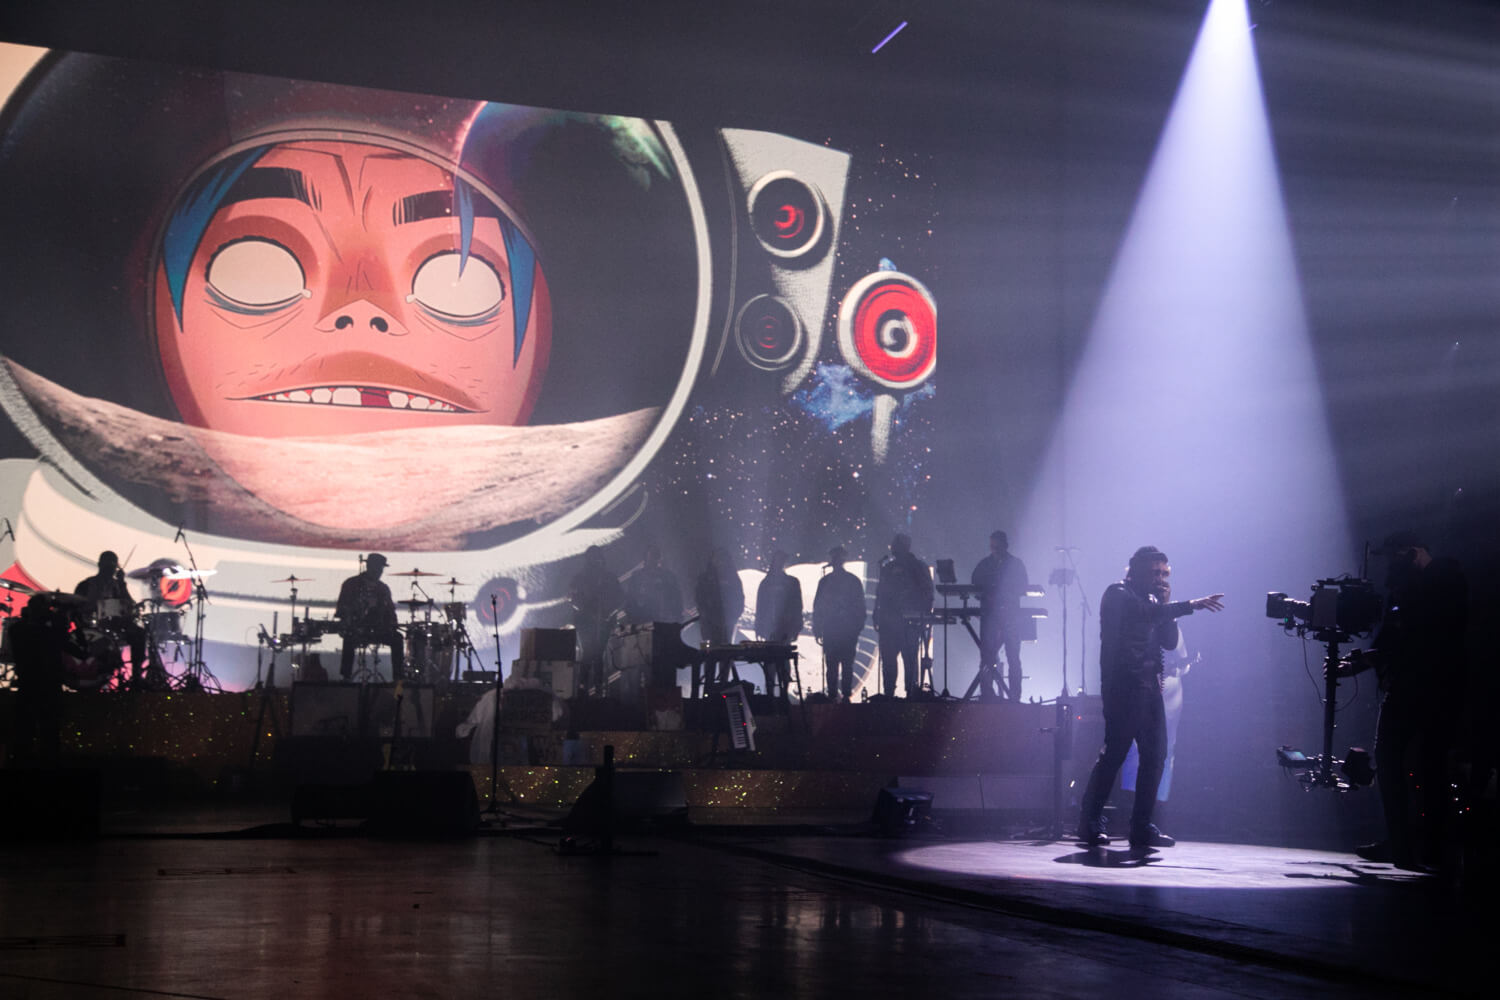 『Gorillaz: Song Machine Live From Kong』場面写真